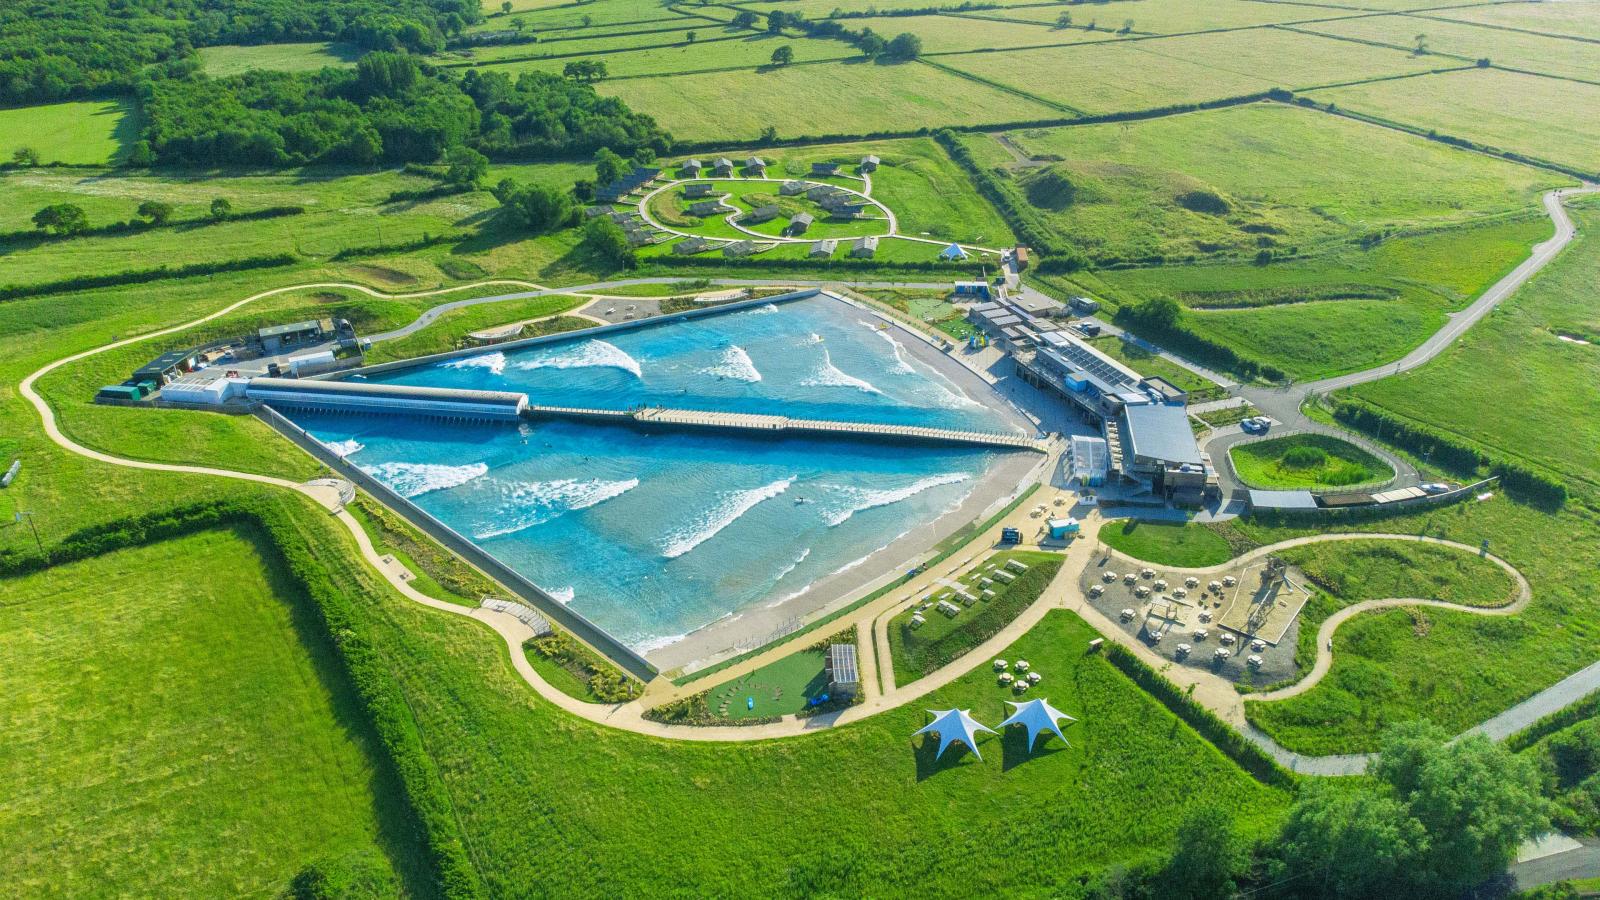 Aerial view of The Wave London, a large wave pool facility surrounded by green fields and trees. The site features a man-made wave generator creating waves, a viewing area, several small buildings, pathways, two tent structures, and a parking lot.